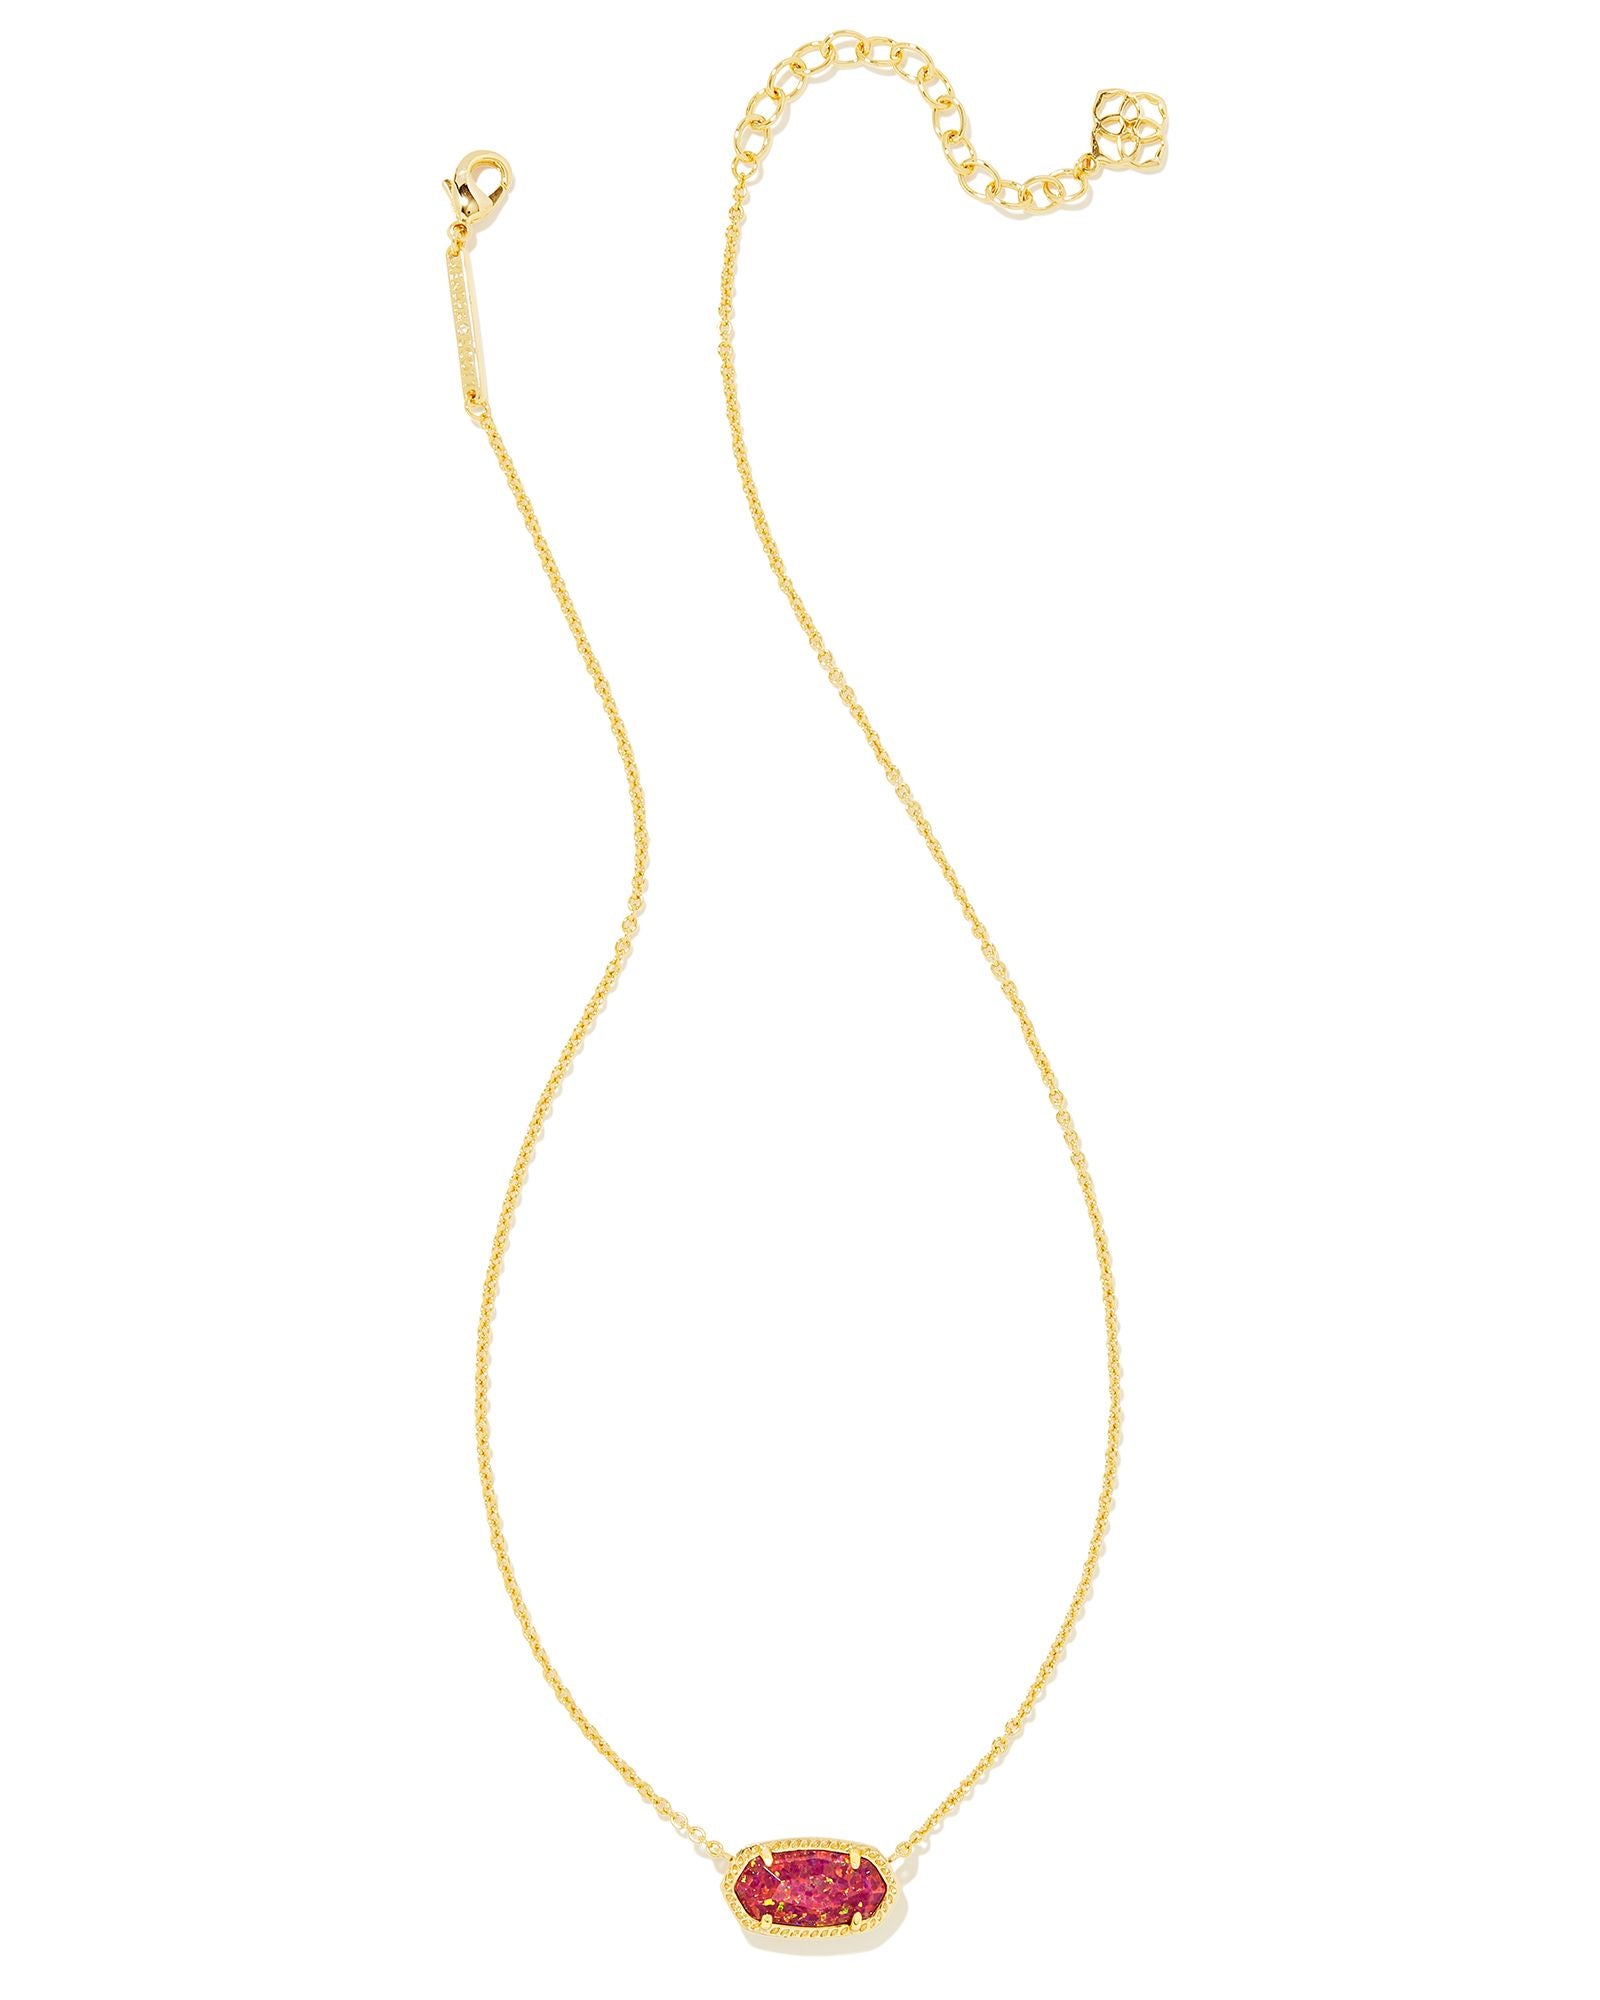 Kendra Scott | Elisa Gold Pendant Necklace in Berry Kyocera Opal - Giddy Up Glamour Boutique